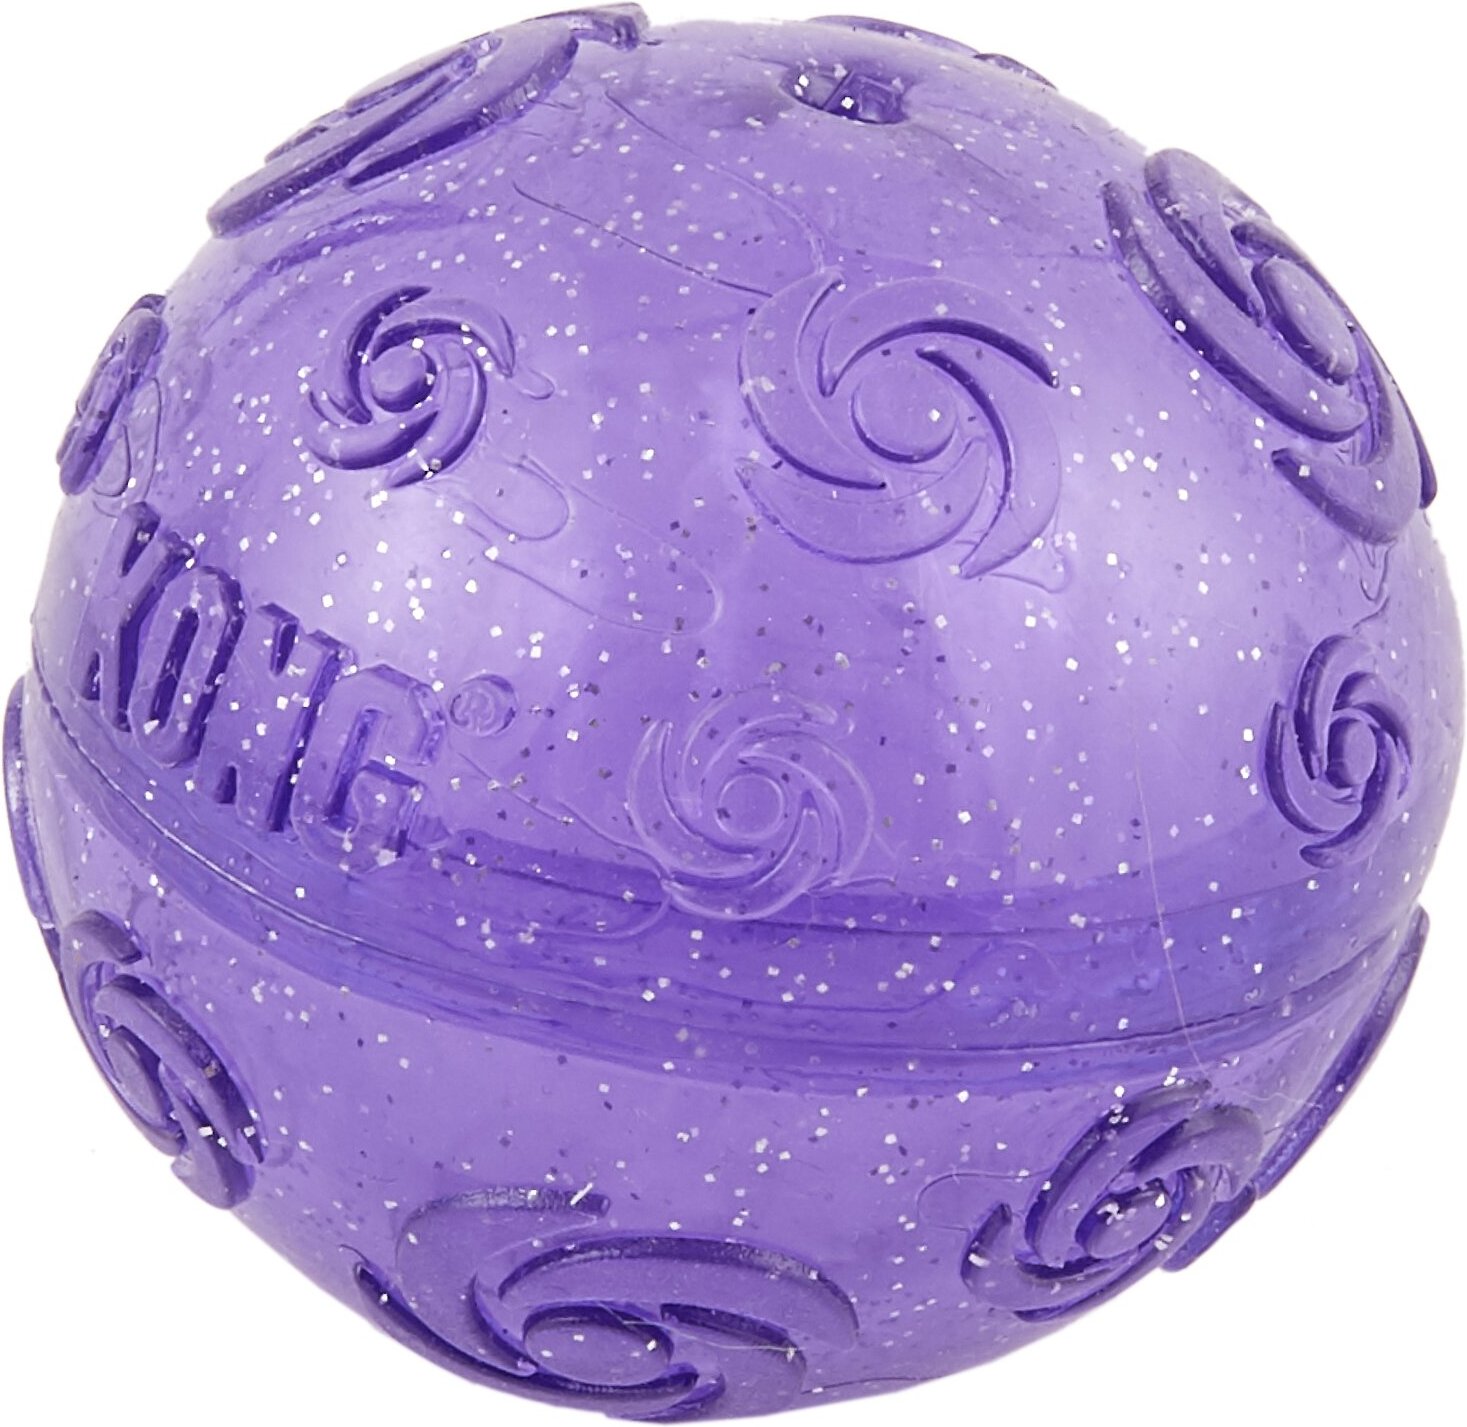 KONG Squeezz Crackle Ball for Dogs 